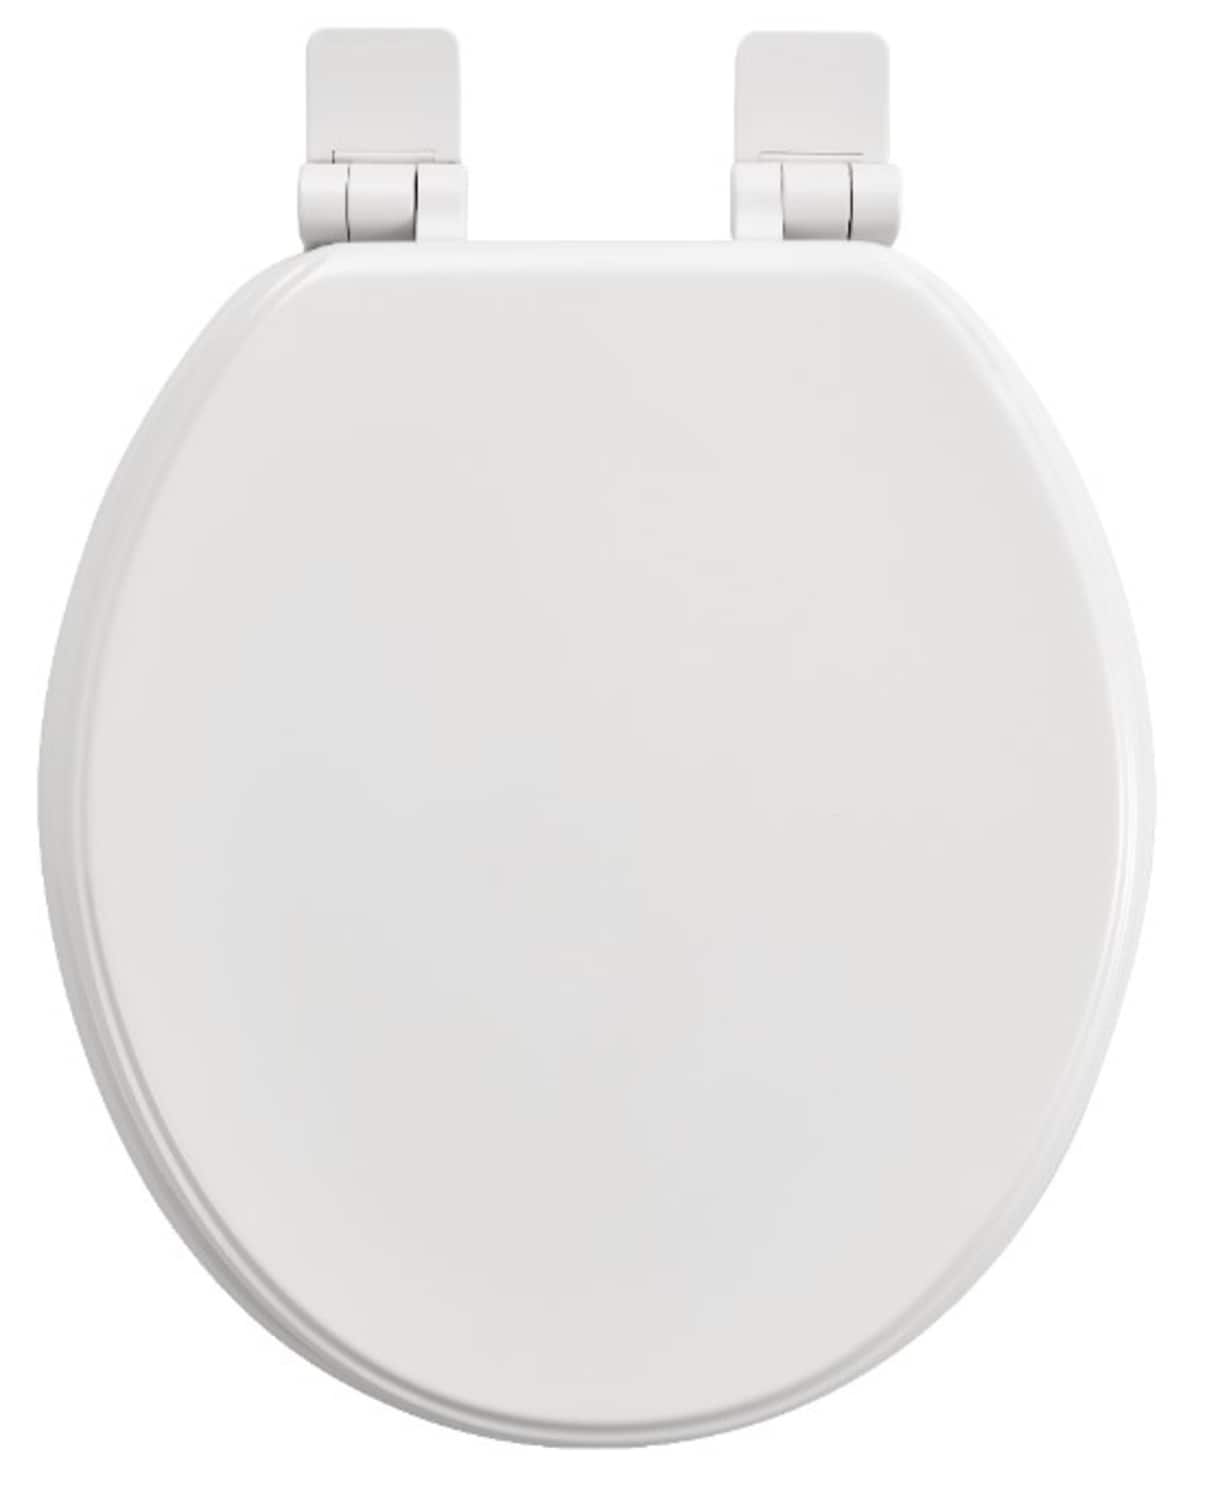 White Toilet Seat Round Slow Close Toilet Lid with Non-Slip Bumpers for Standard Round Toilets Bowls Durable Plastic